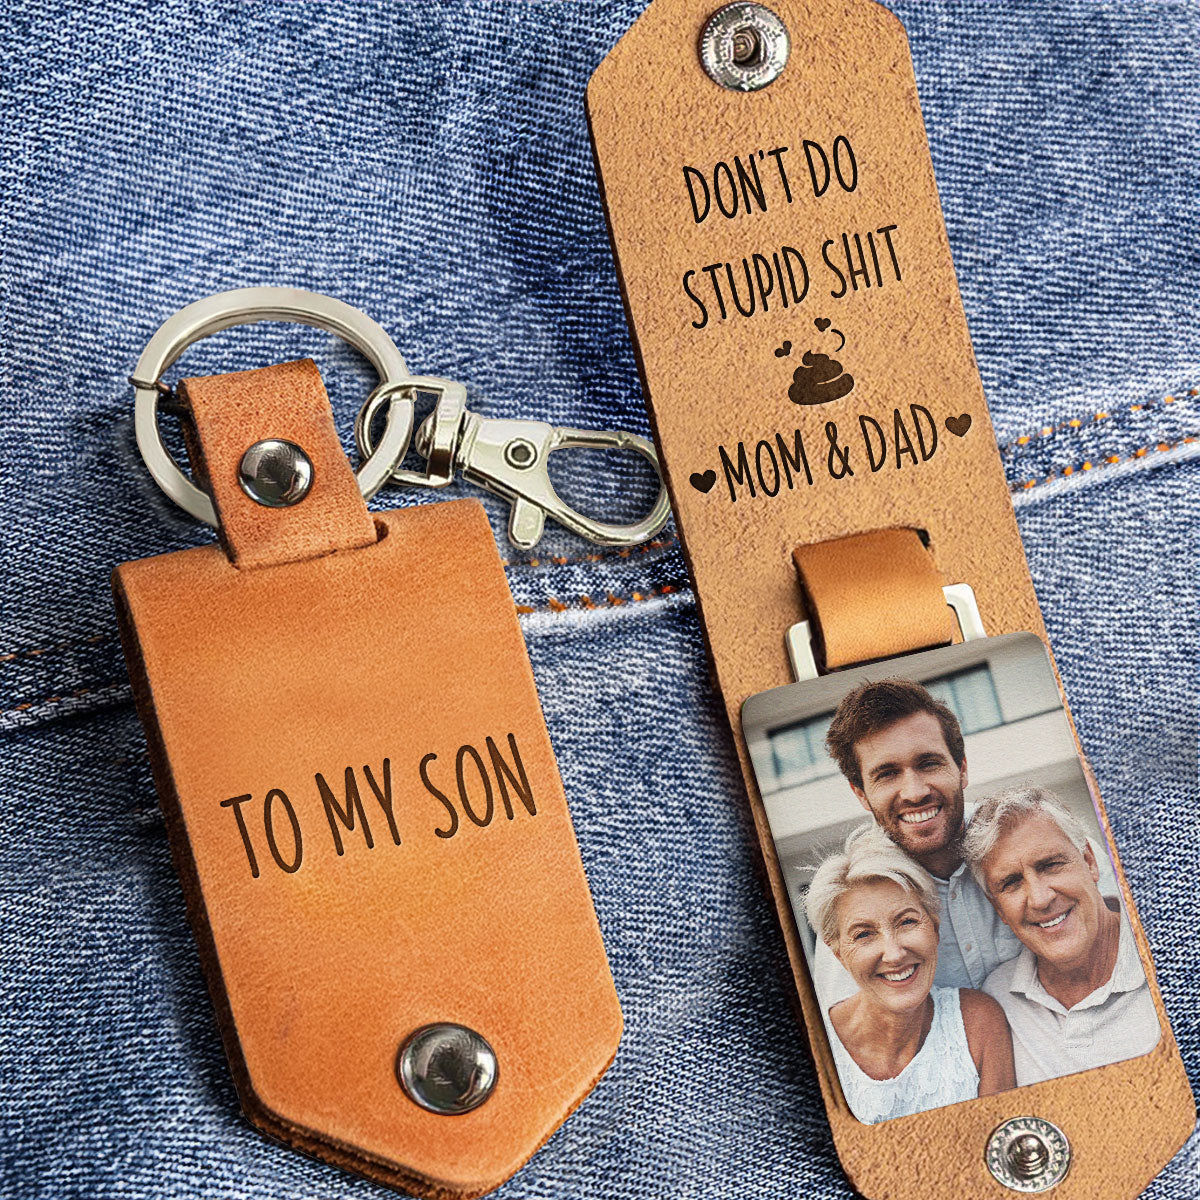 Don't do stupid shit keyring - Love Mum/Dad - personalised to suit!